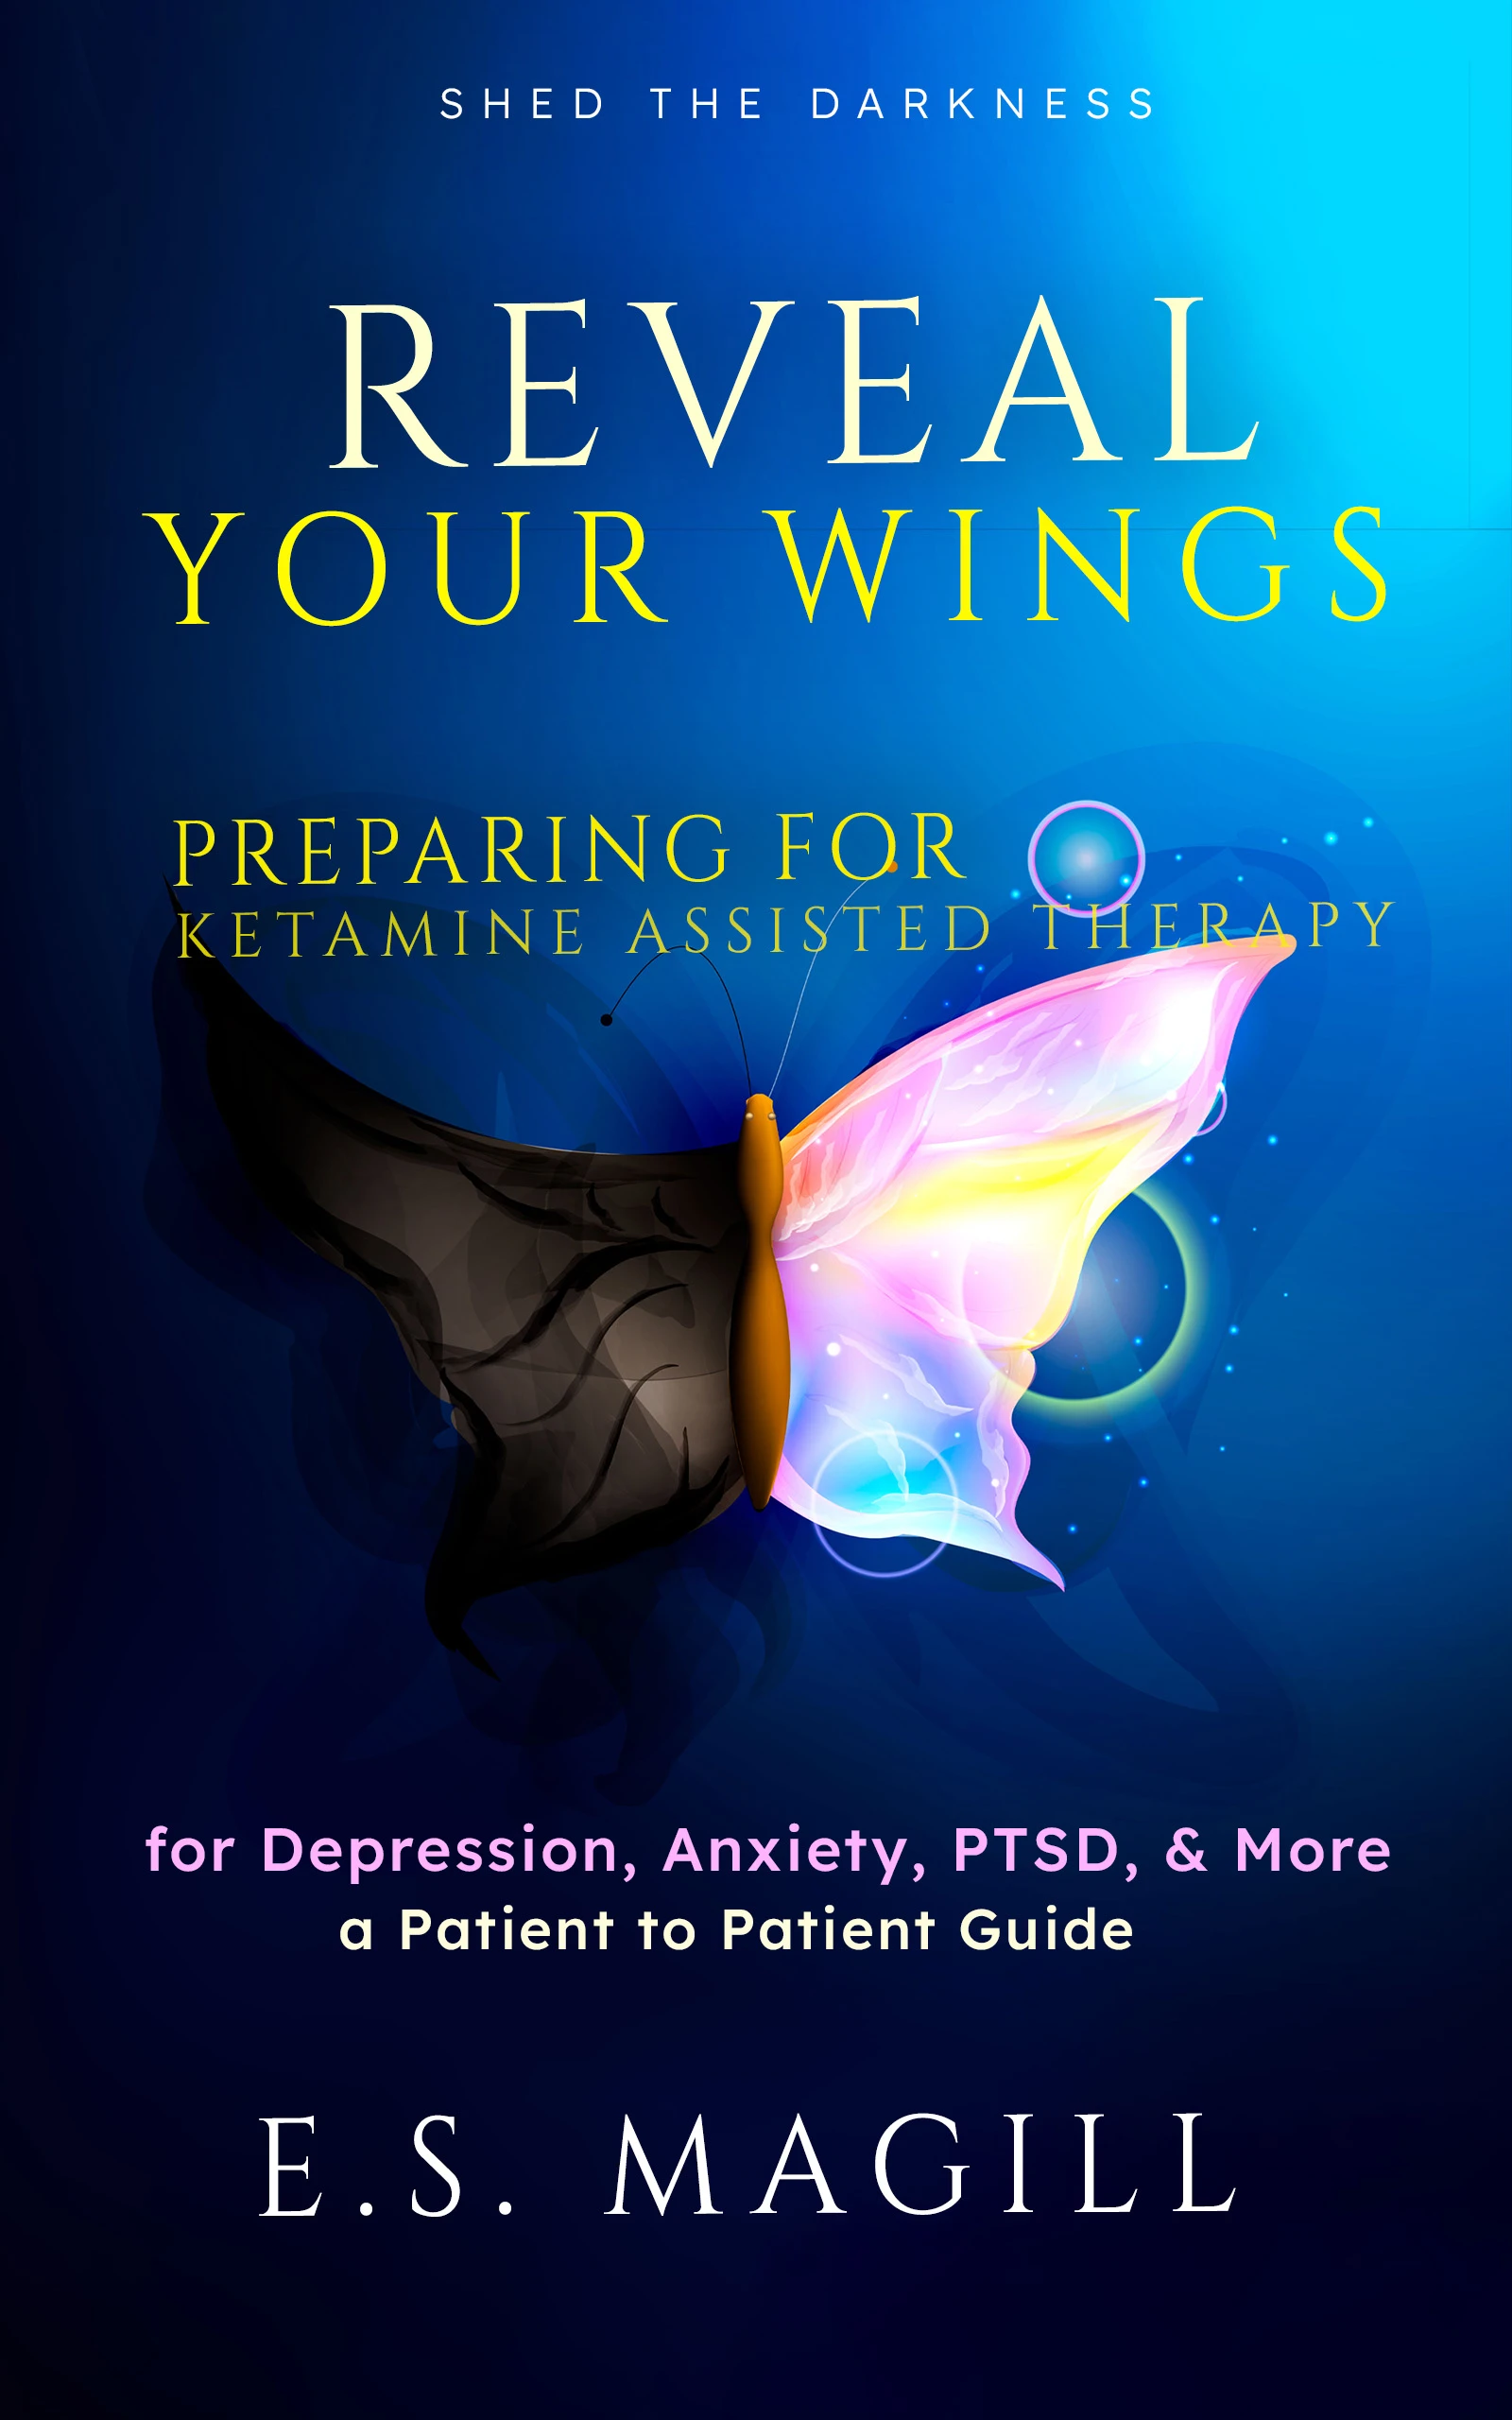 Reveal Your Wings: Preparing for Ketamine Assisted Therapy for Depression, Anxiety, PTSD, & More A Patient to Patient Guide